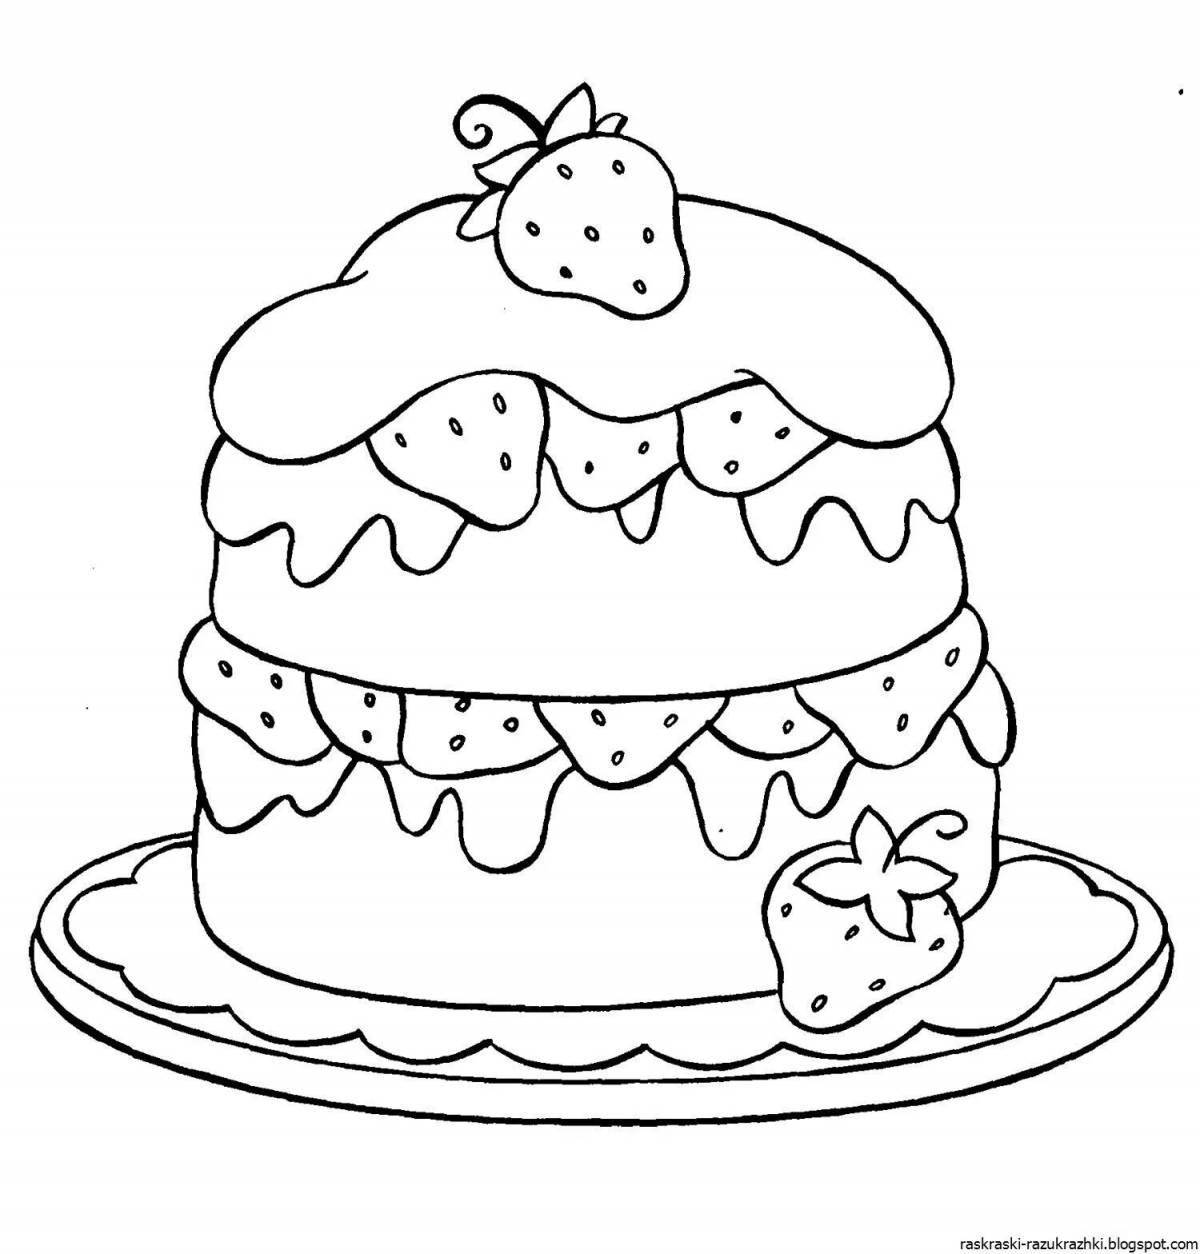 Tempting chocolate cake coloring page